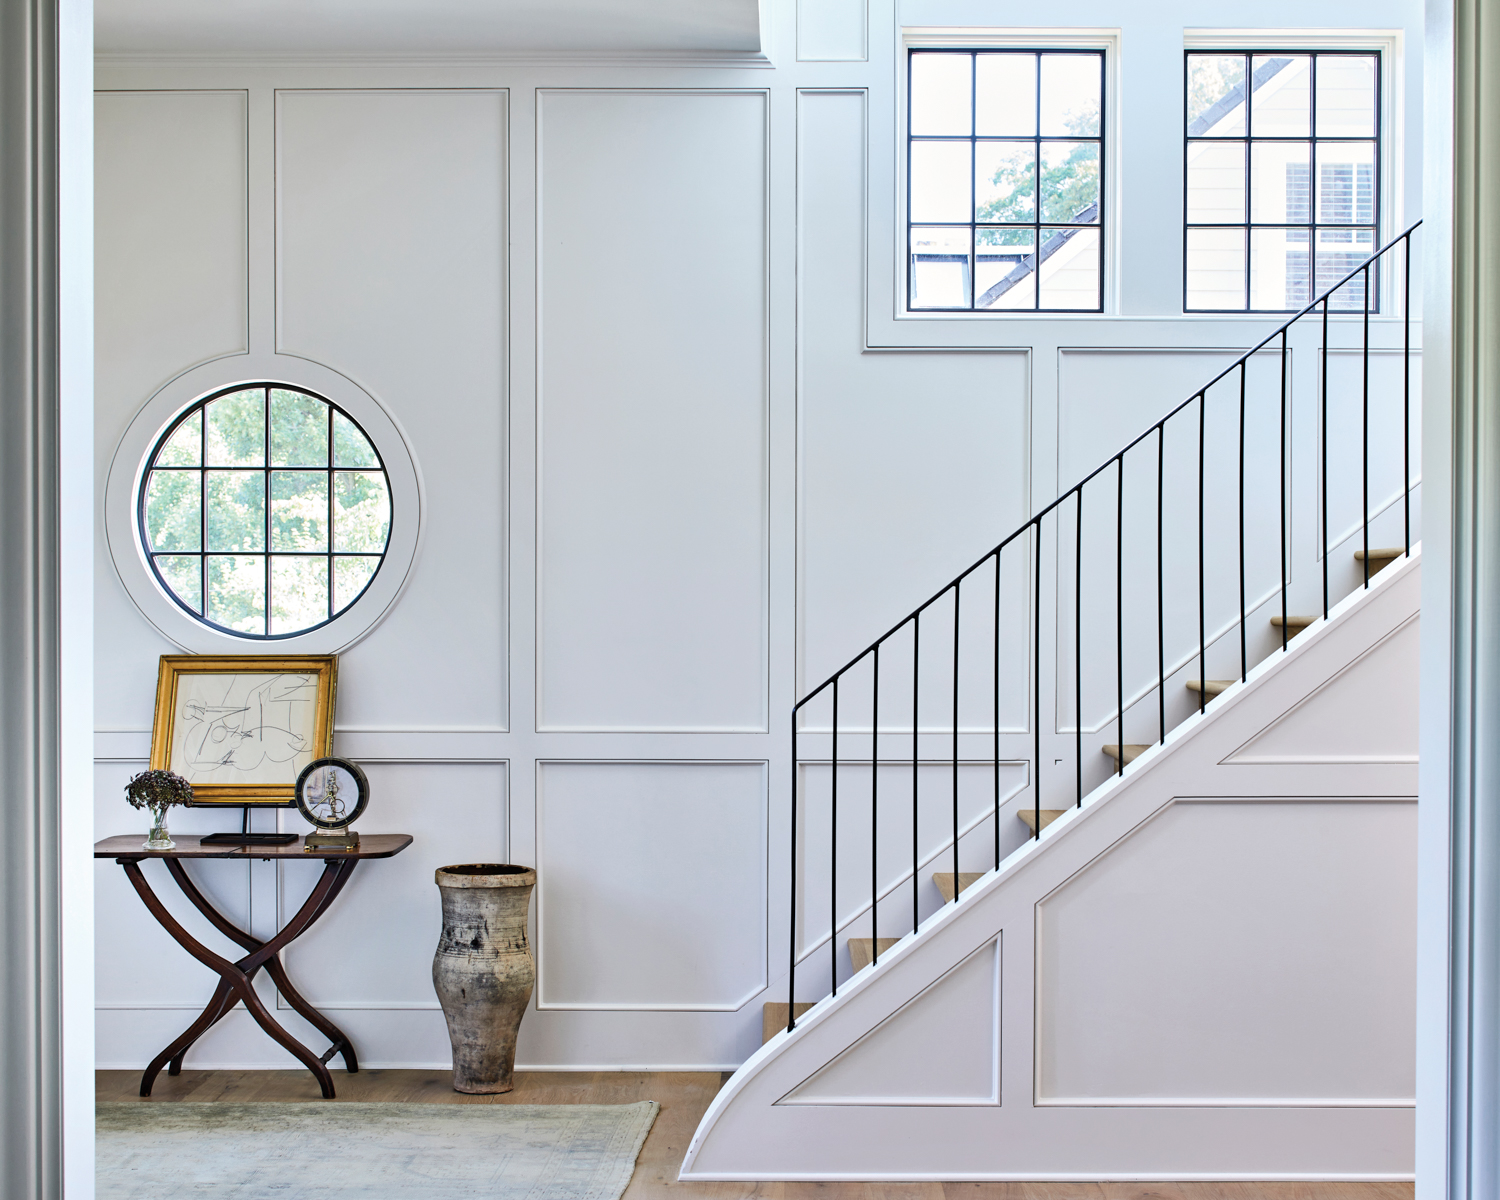 Stair hall with paneled walls, a round window and graceful metal stair railing